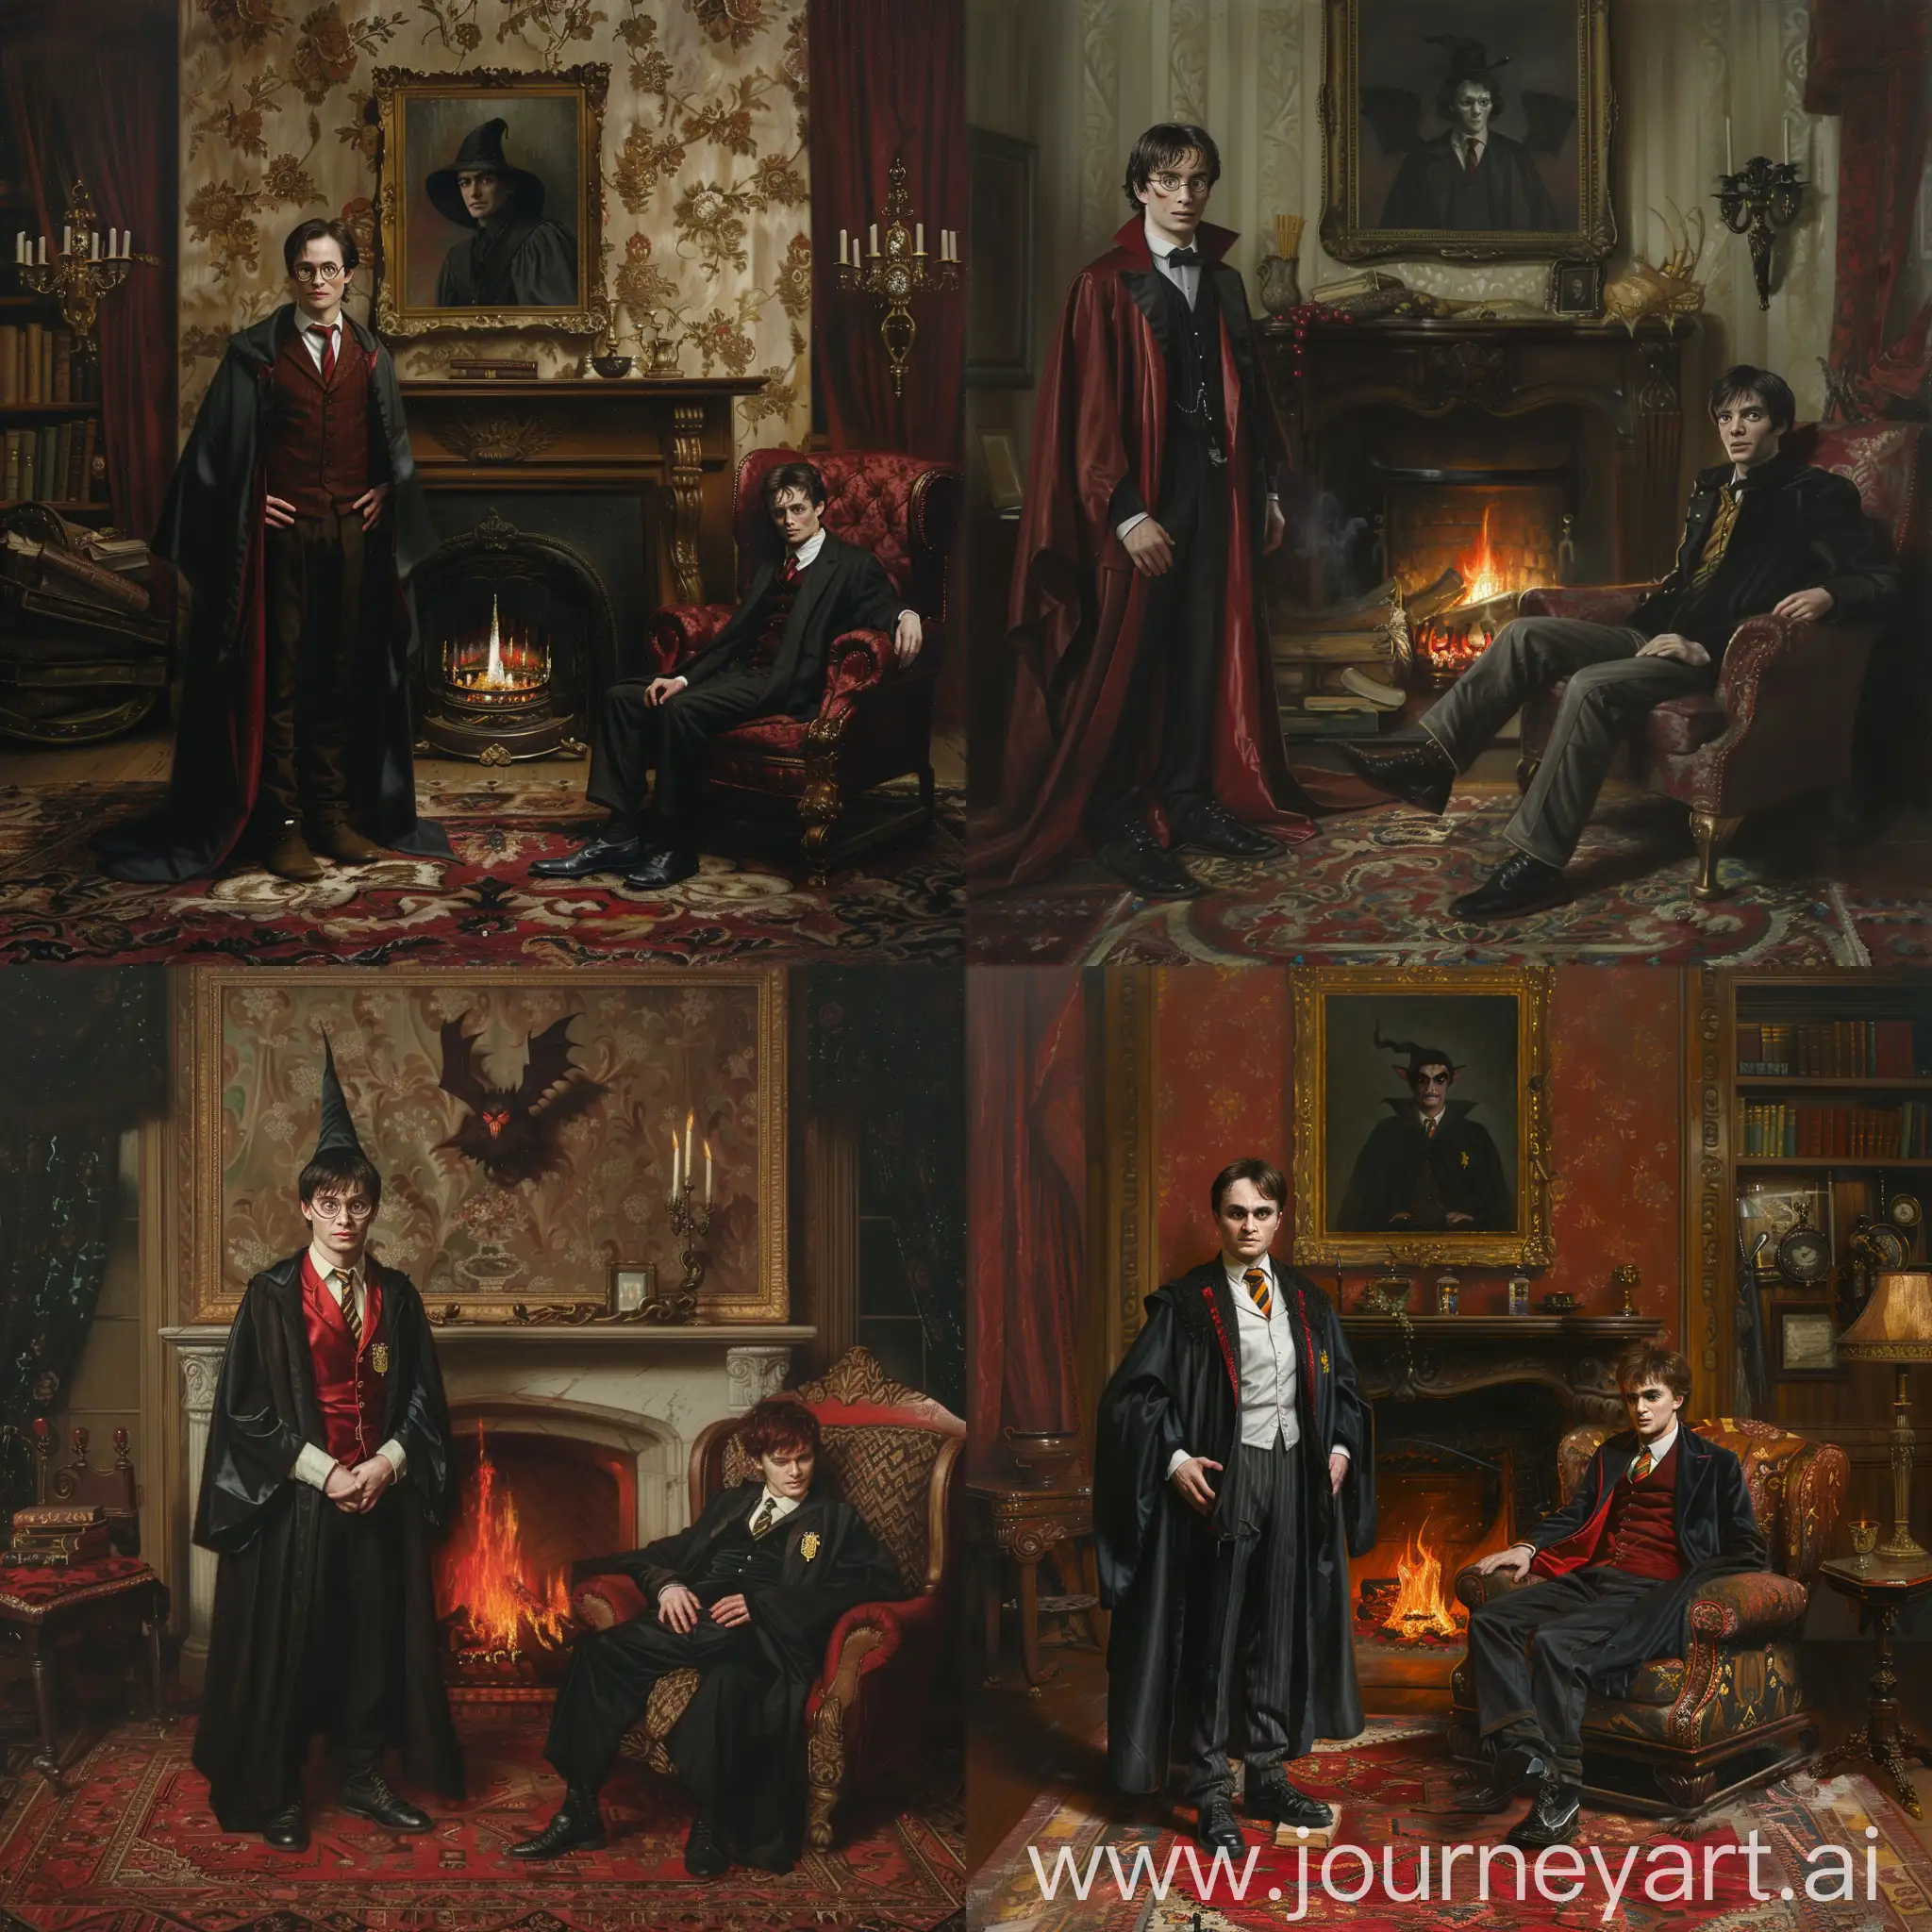 Harry-Potter-and-Tom-Riddle-in-19th-Century-Style-Painted-Scene-by-the-Fireplace